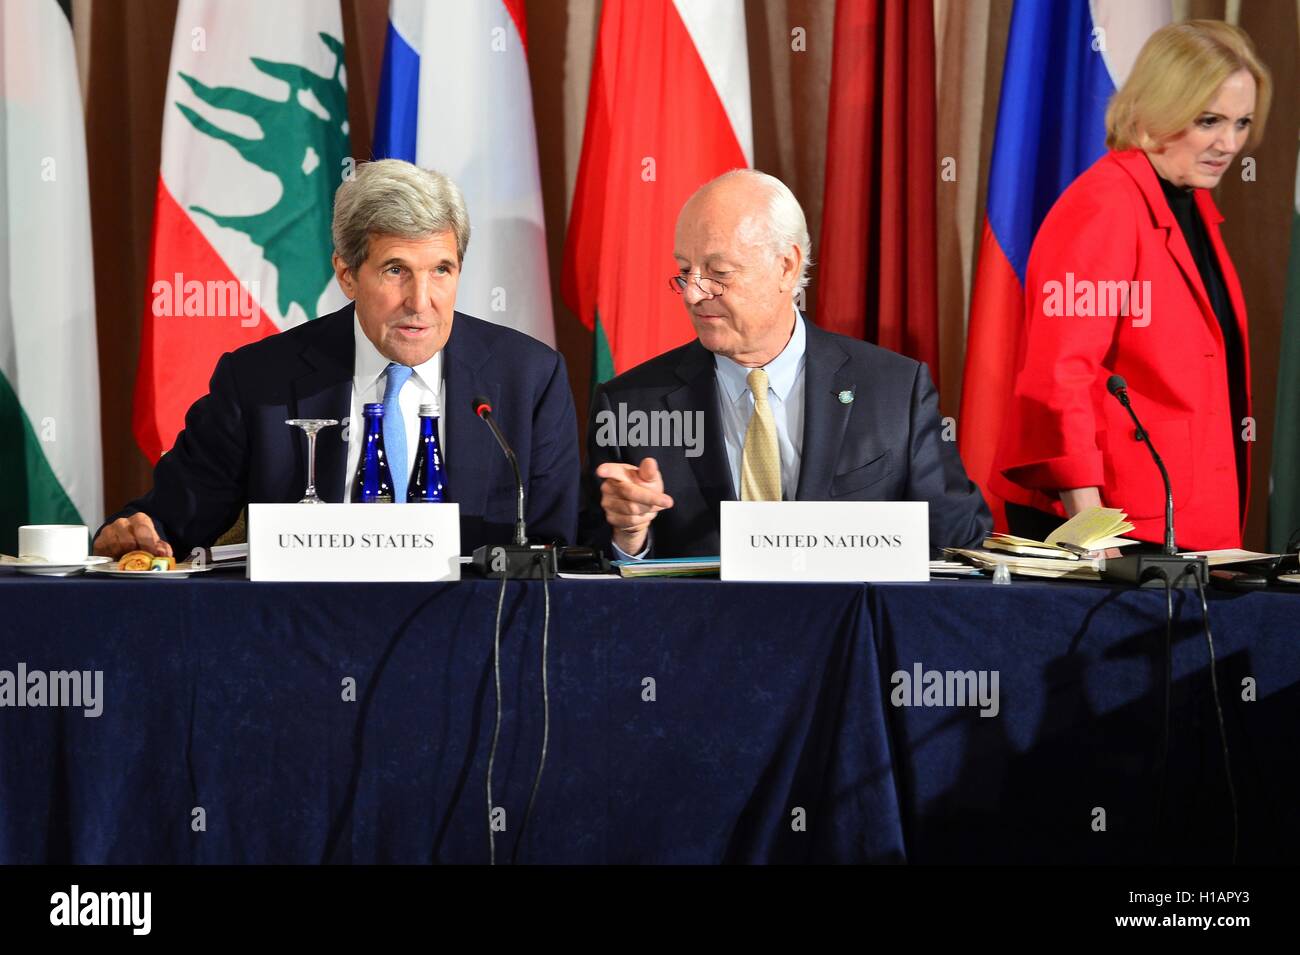 U.S. Secretary of State John Kerry alongside U.N. Special Envoy for Syria Staffan de Mistura during the International Syria Support Group meeting at the Palace Hotel September 22, 2016 in New York, New York. Stock Photo